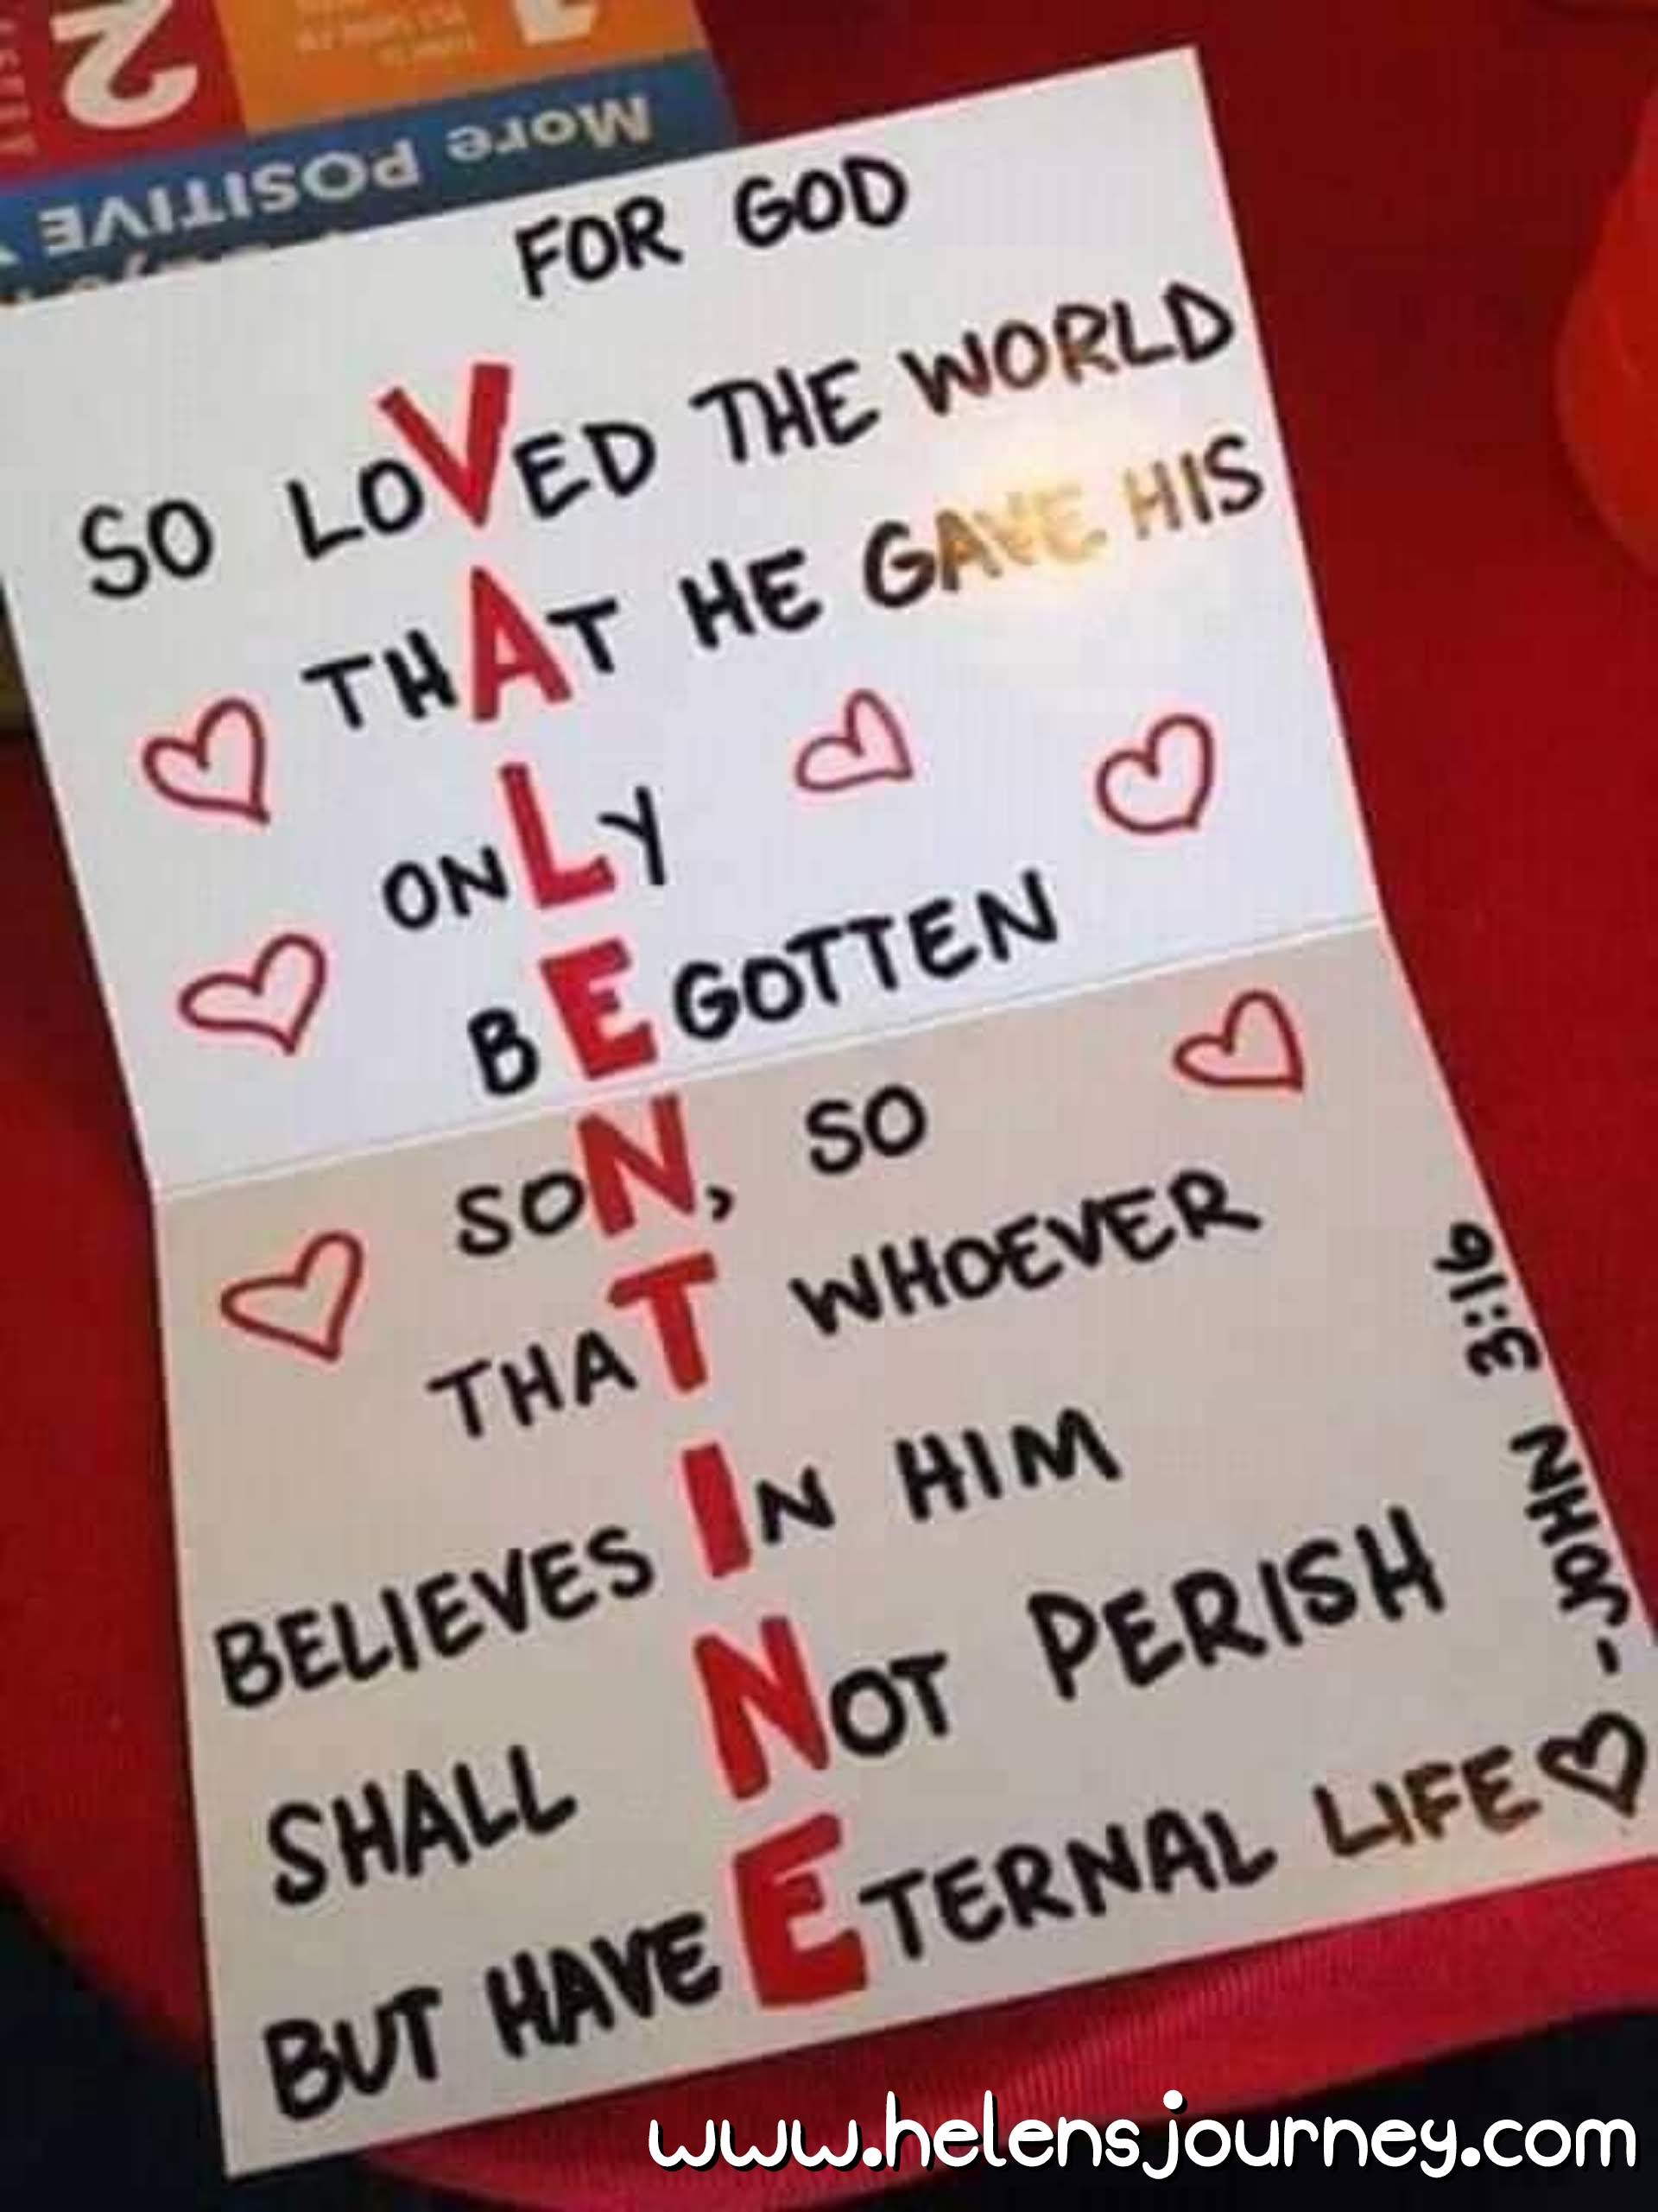 Valentines Day assurance for christian singles